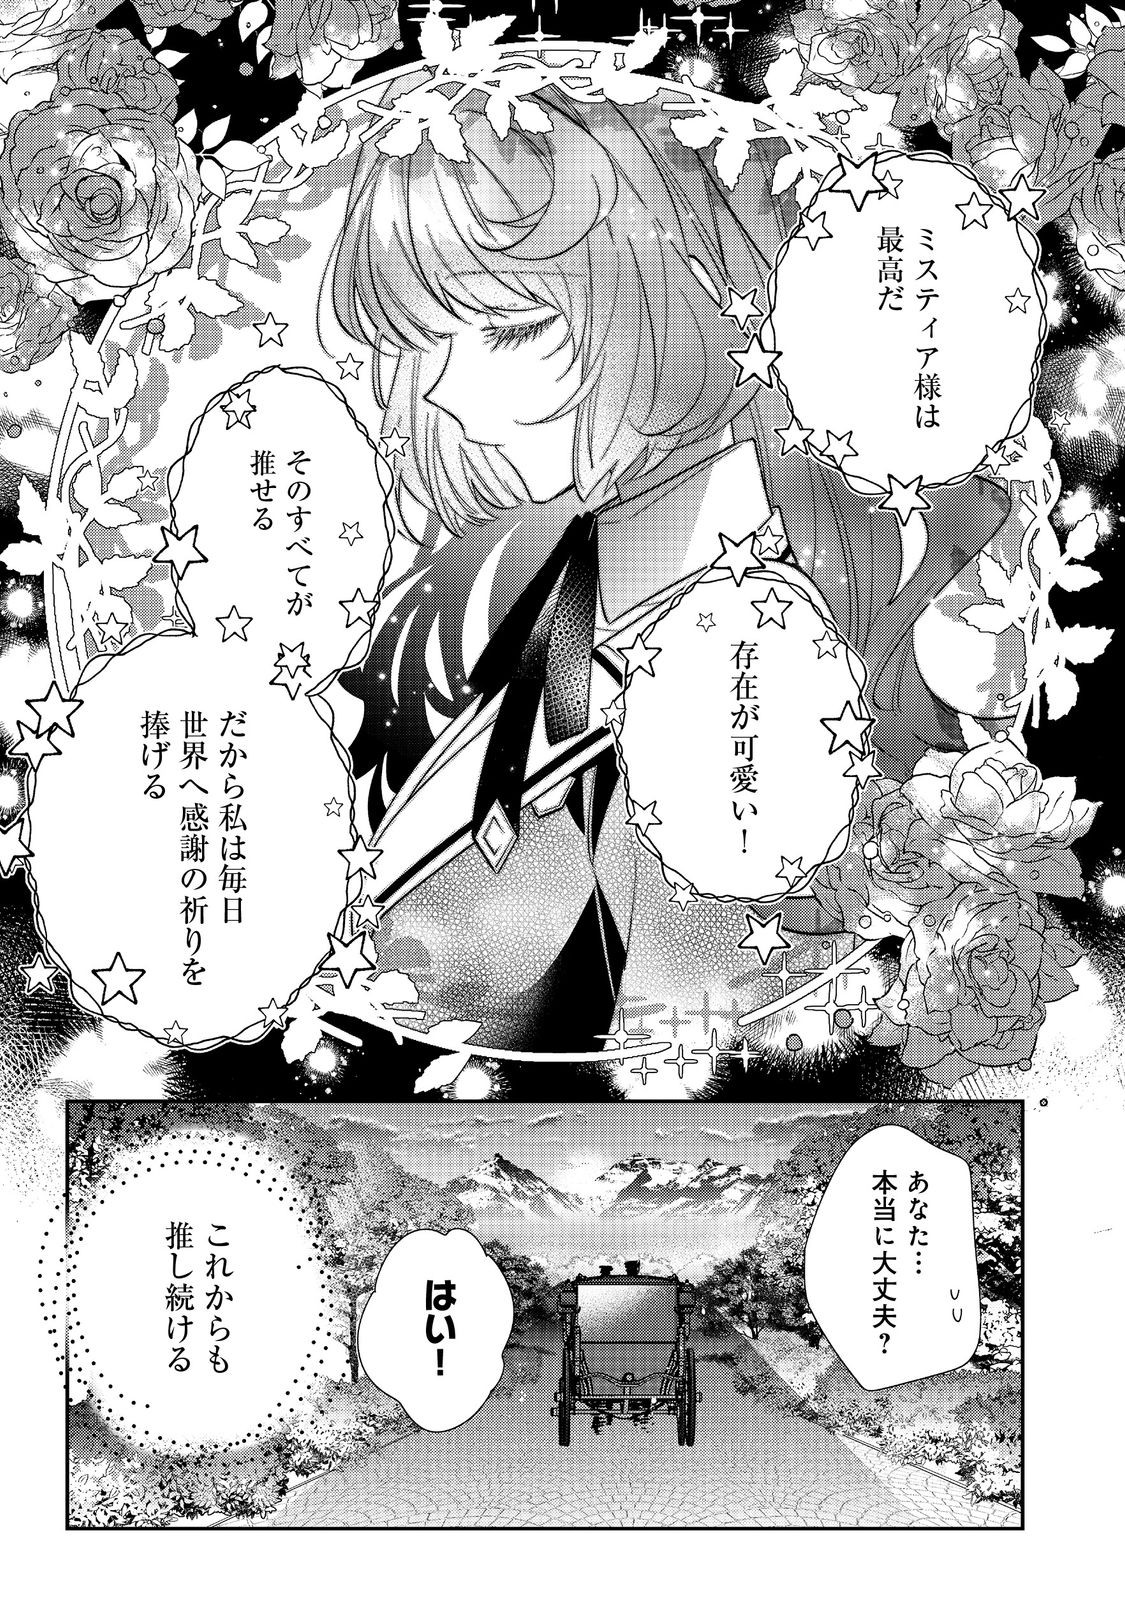 I Was Reincarnated As The Villainess In An Otome Game But The Boys Love Me Anyway! - Chapter 24.1 - Page 17